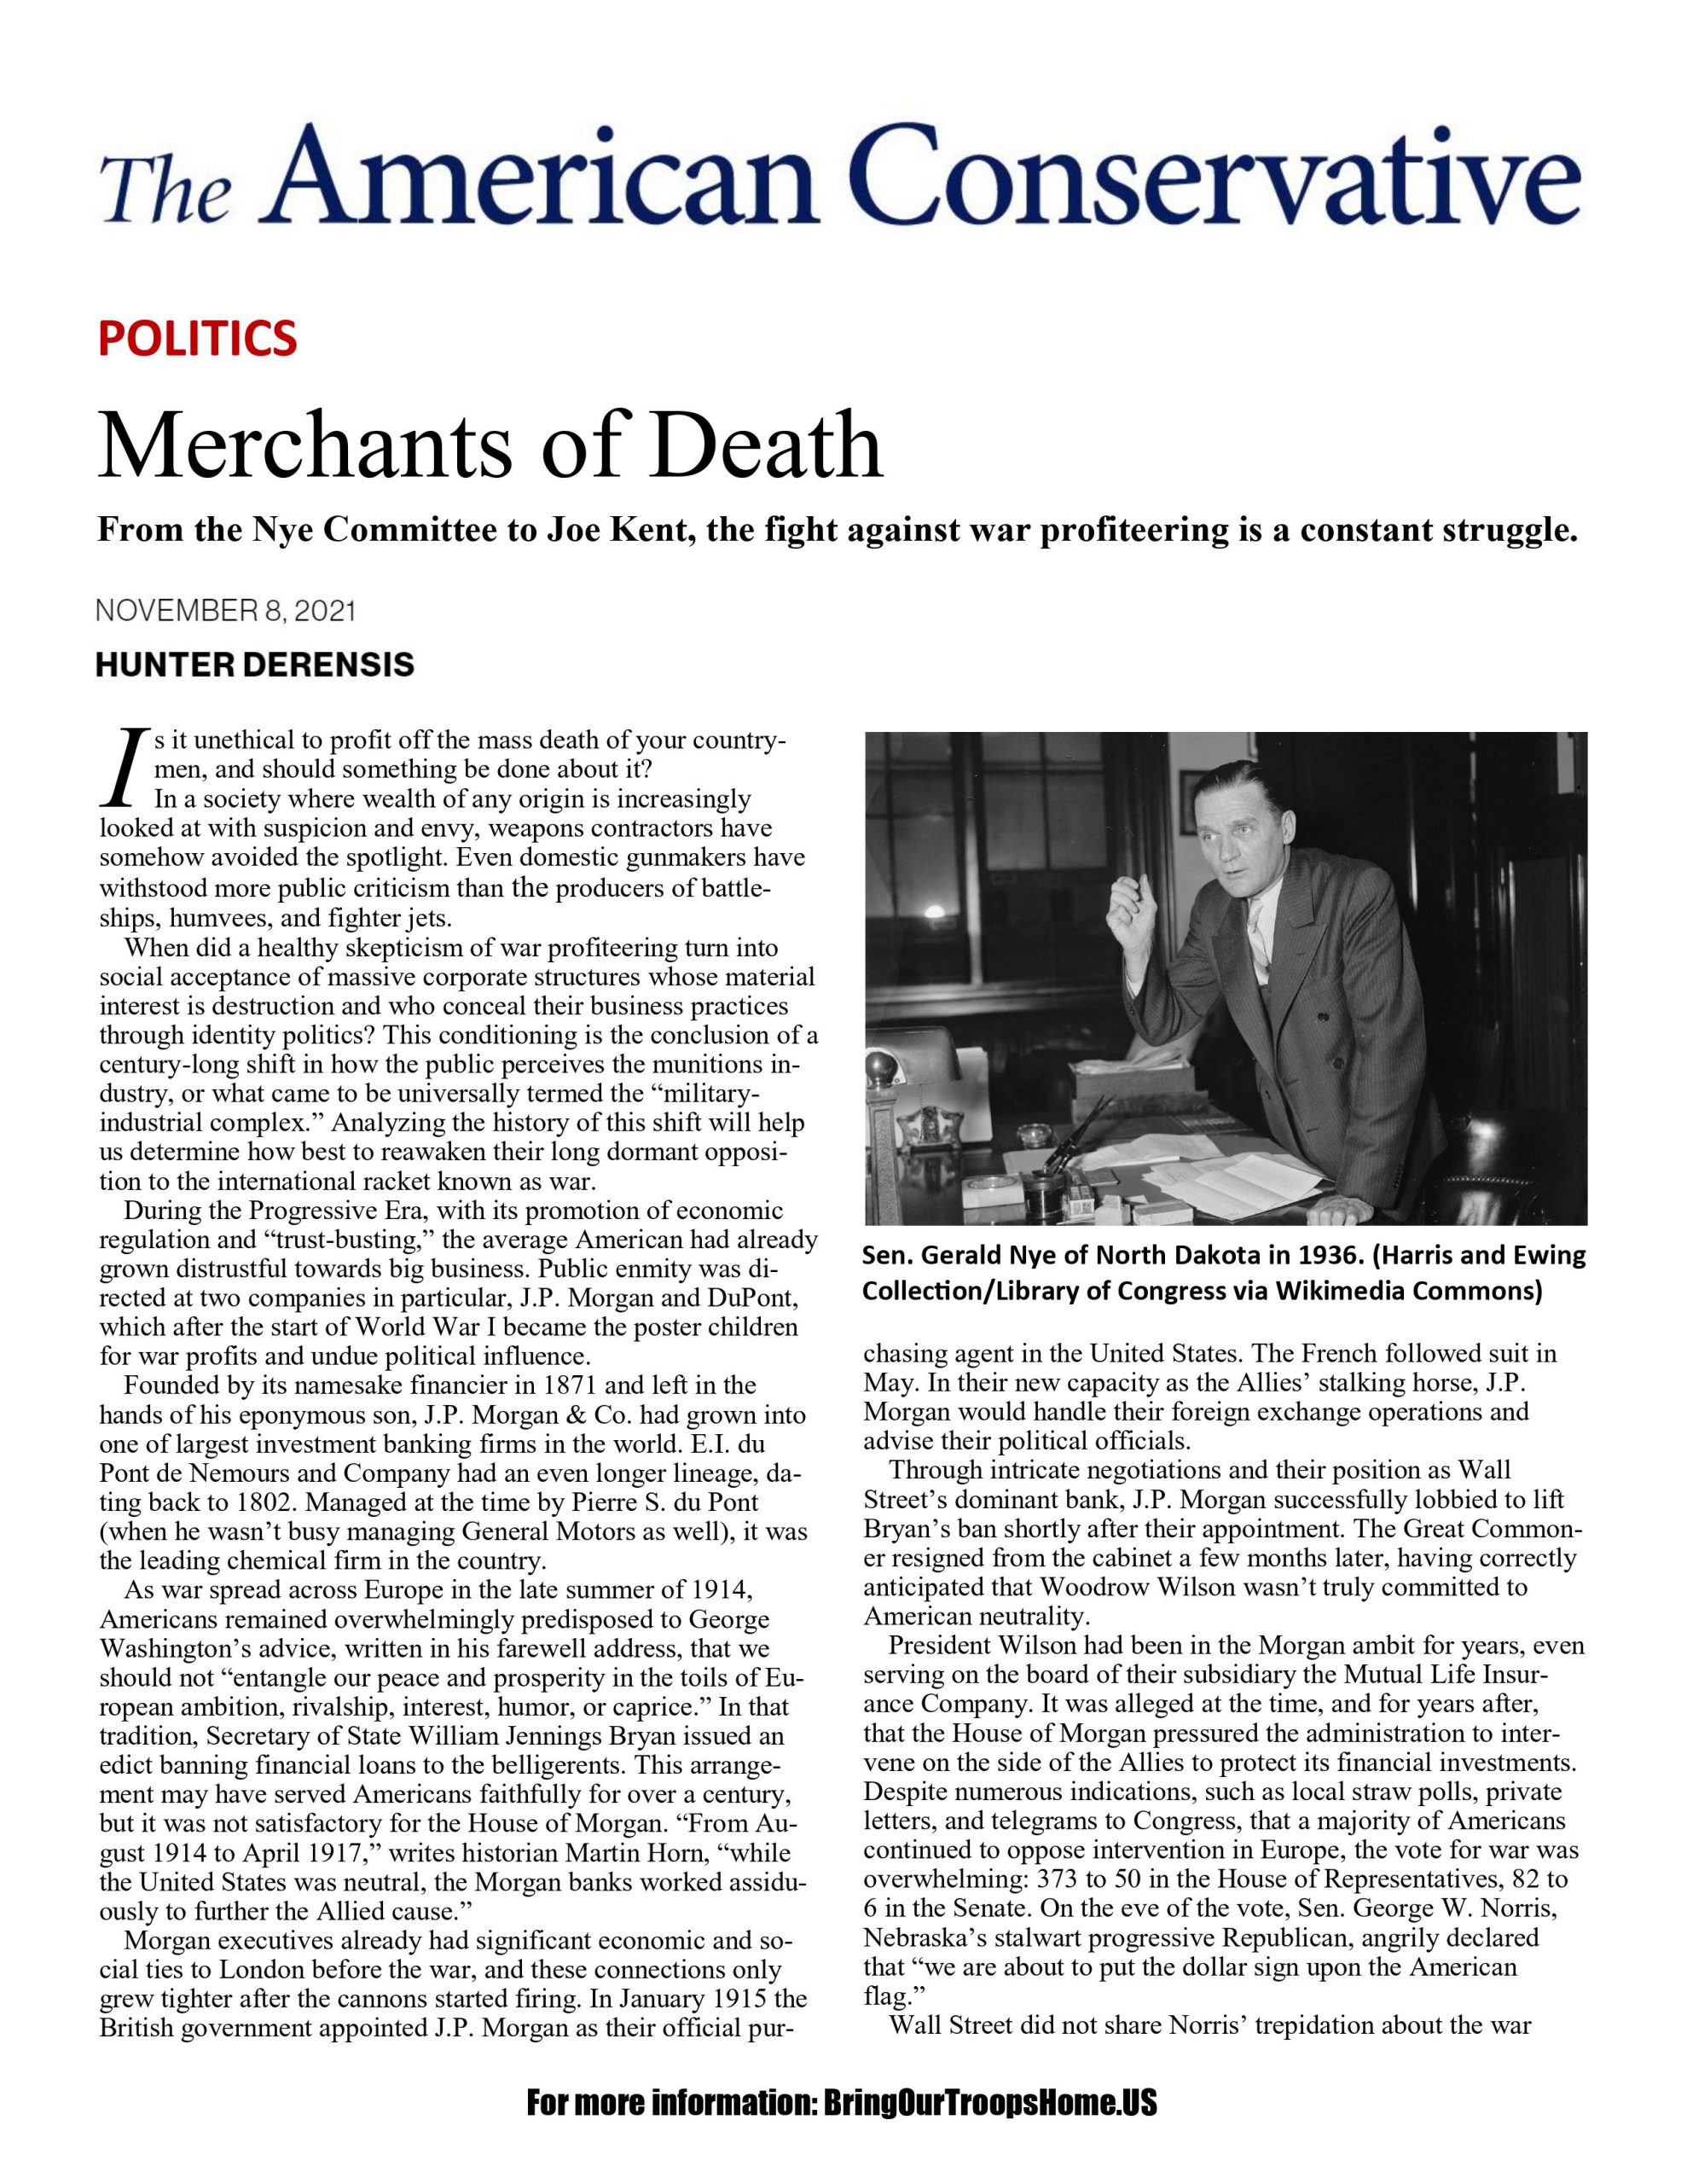 Merchants of Death: From the Nye Committee to Joe Kent, the Fight Against War Profiteering Is a Constant Struggle